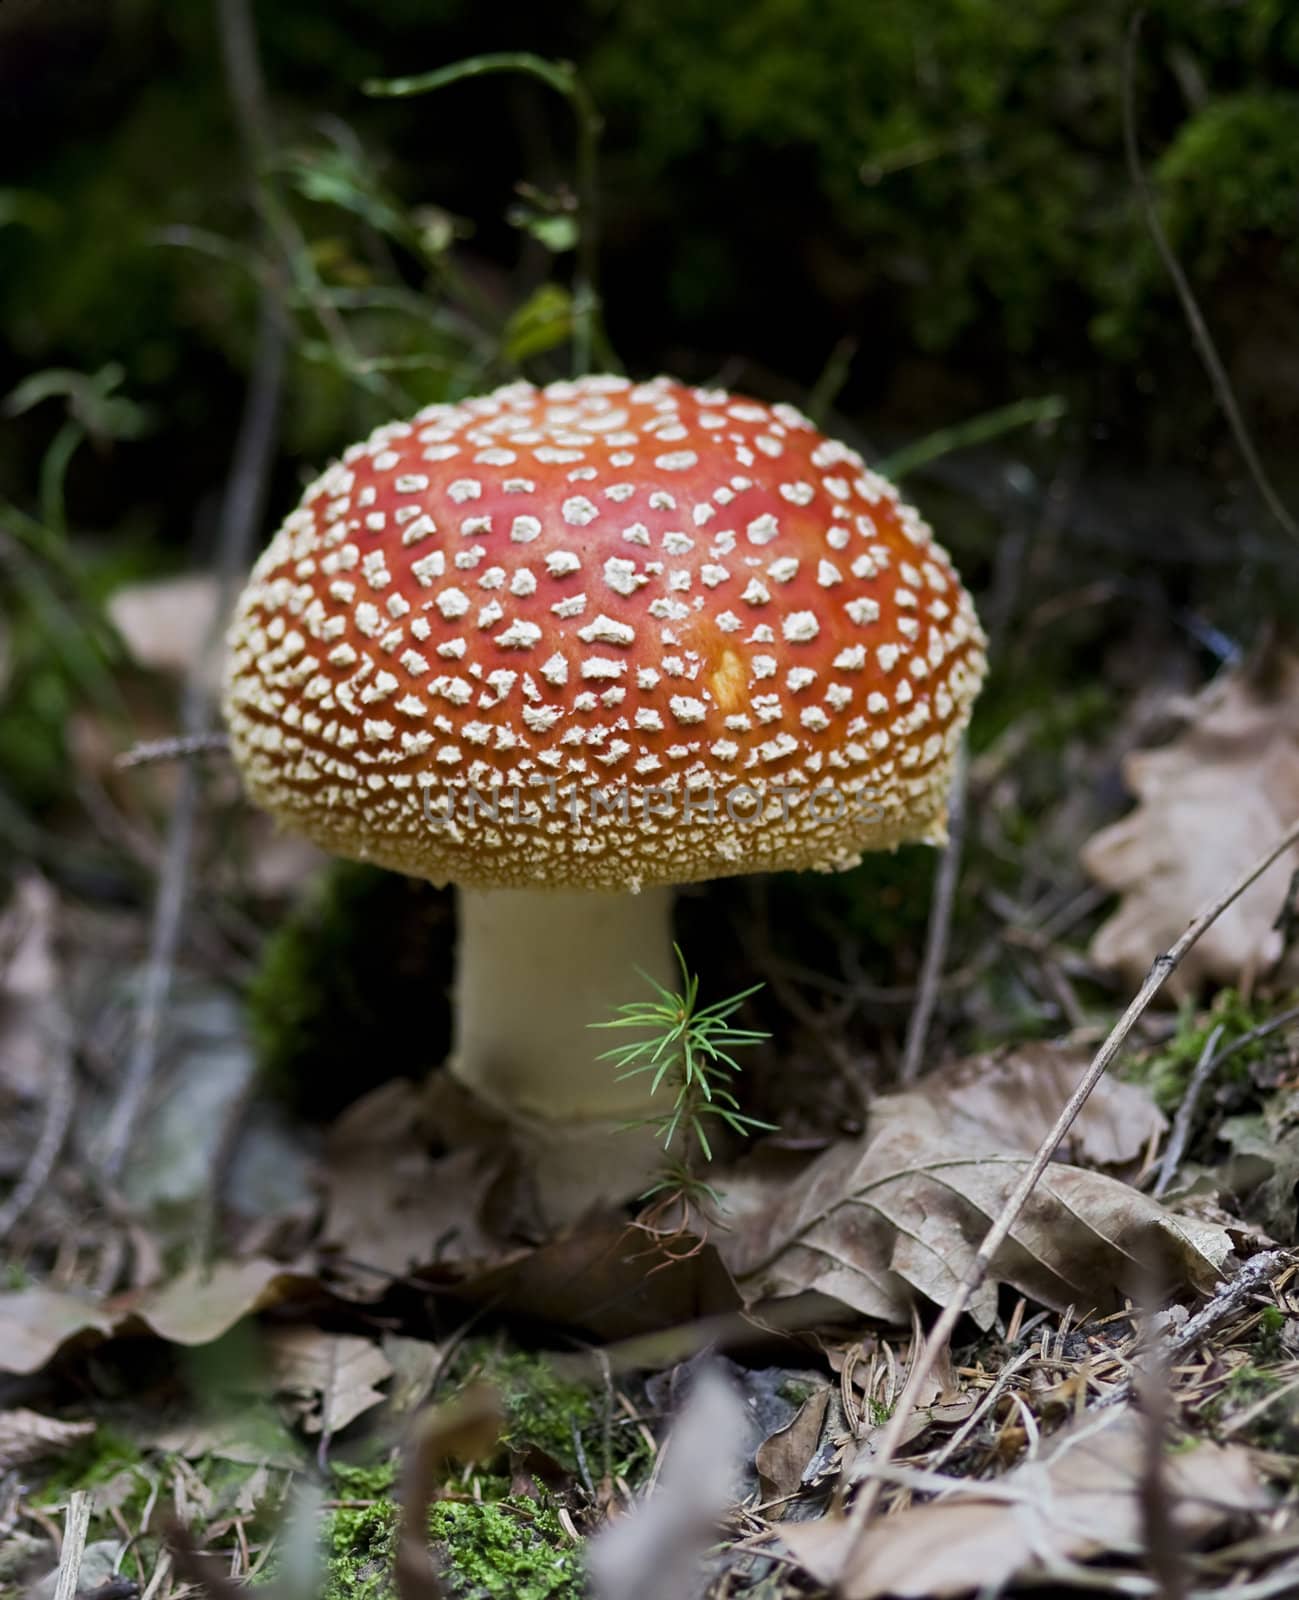 Detail of the fly poison amanita - poisonous mushroom